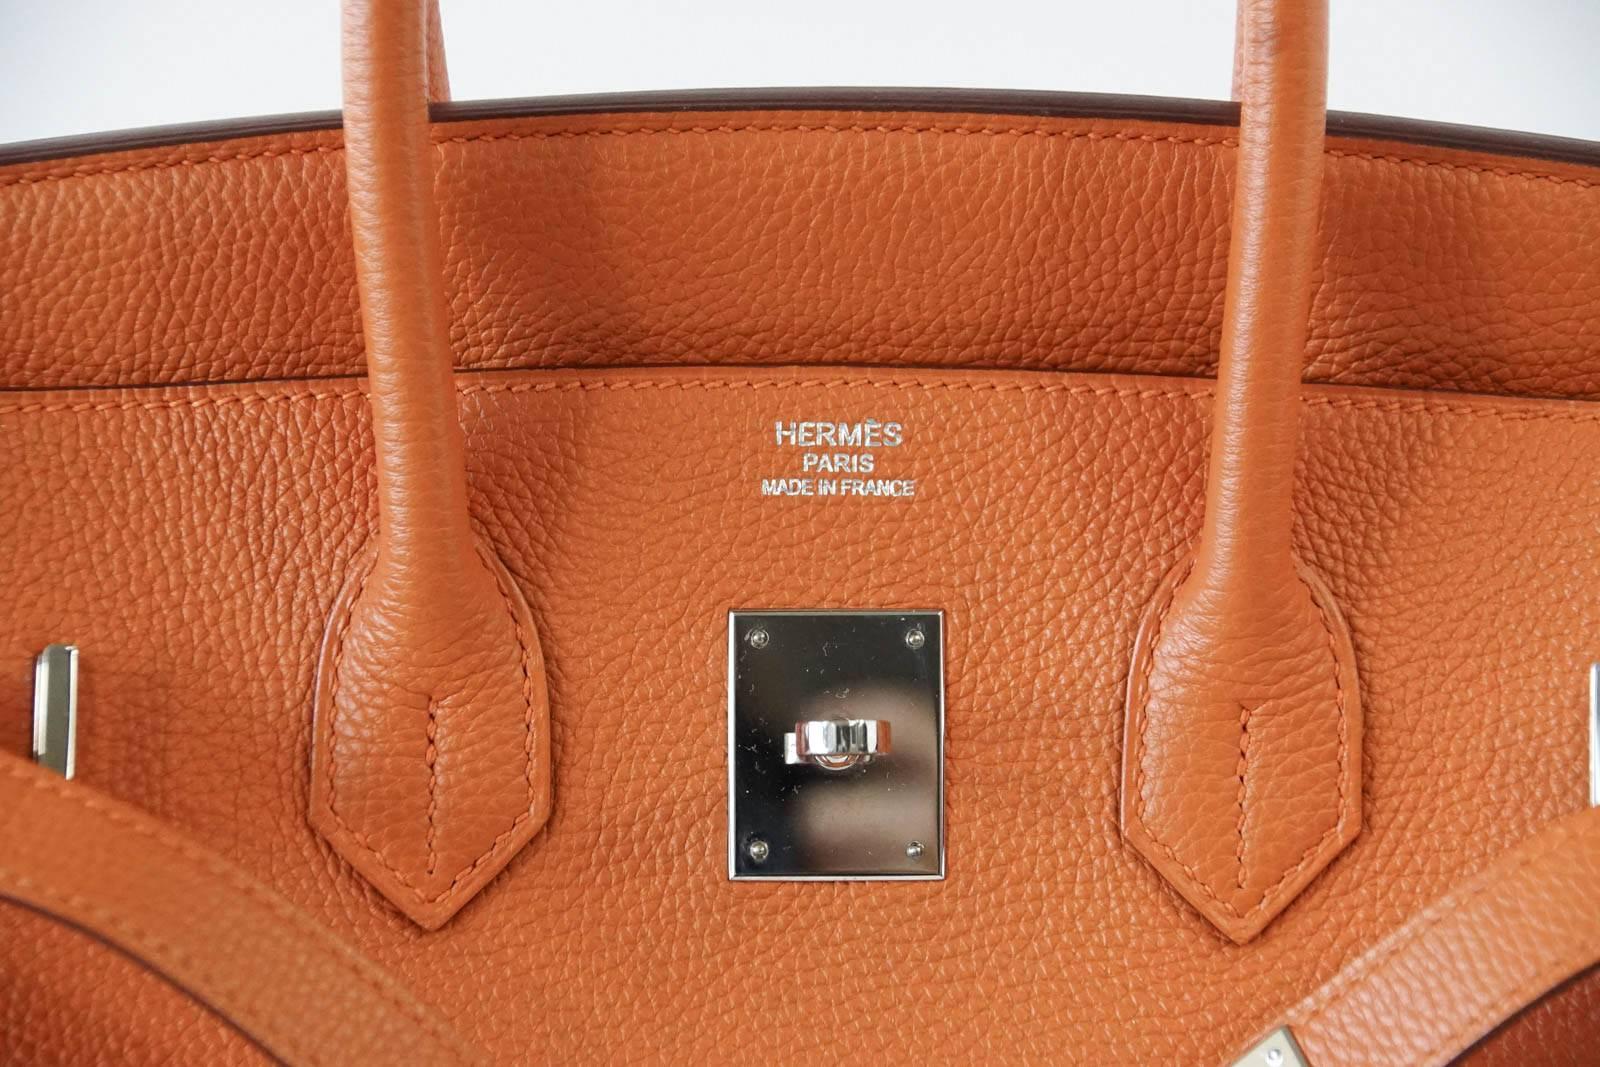 Guaranteed authentic Hermes Birkin 35 iconic H Orange is retired and no longer produced.
Fresh with palladium hardware.
Togo leather is textured and scratch resistant. 
Just returned from Hermes Spa!
Body and interior are spotless.  Barely any